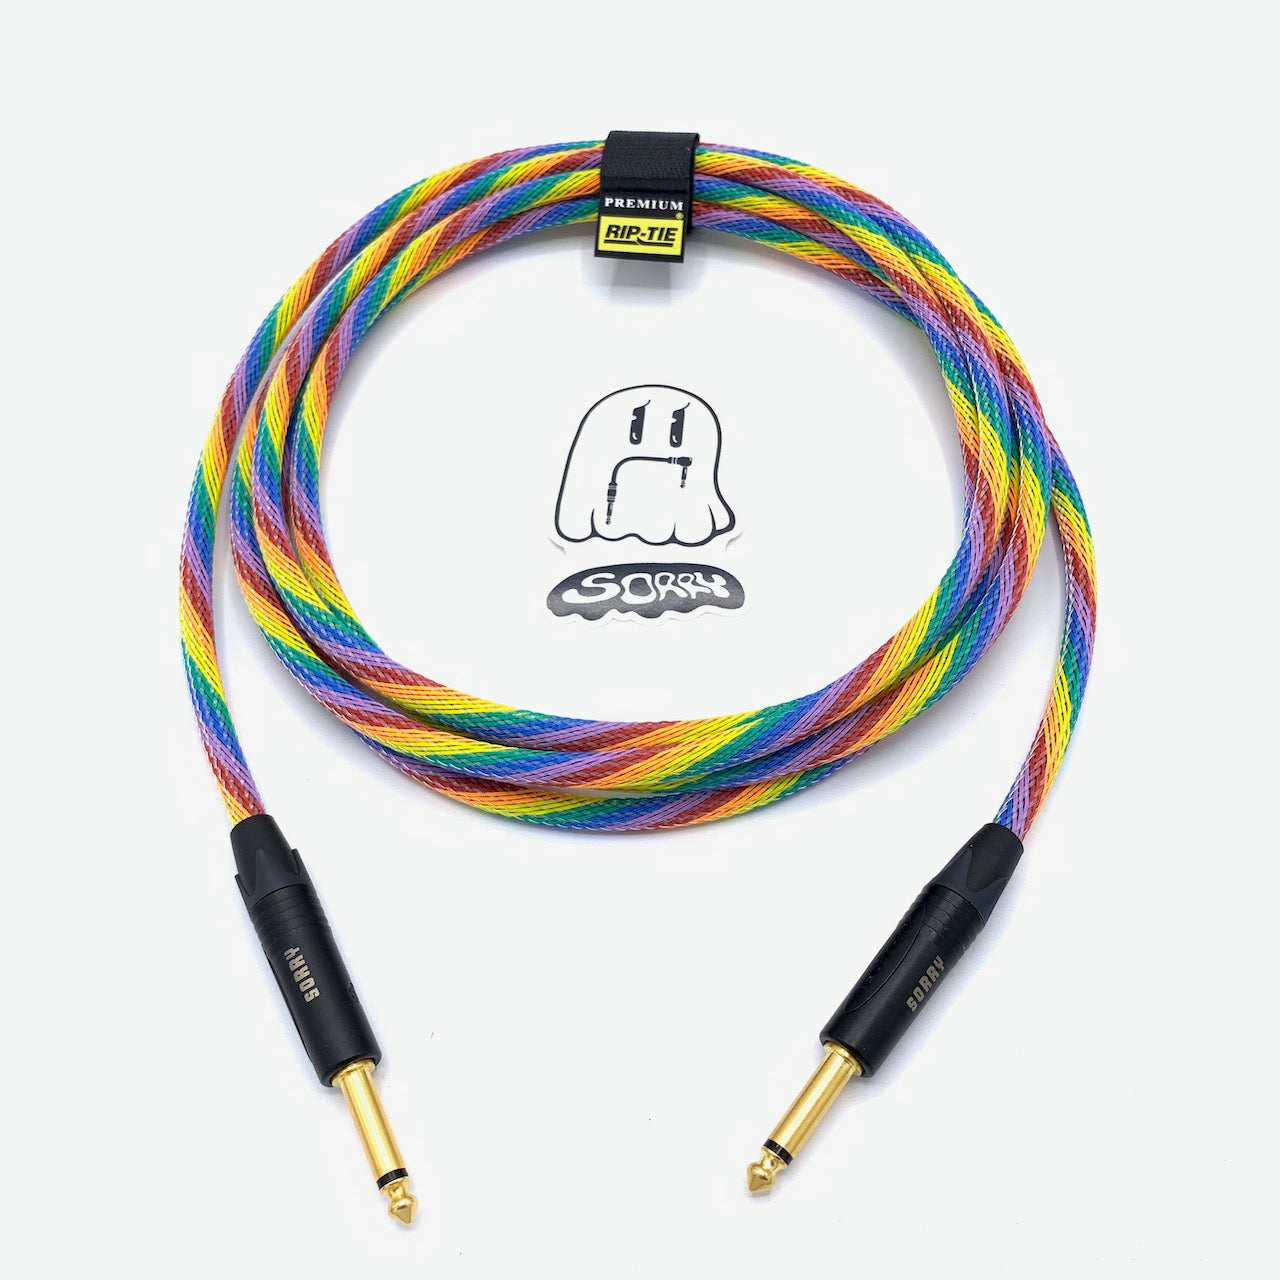 SORRY Straight to Straight Guitar / Instrument Cable - Rainbow